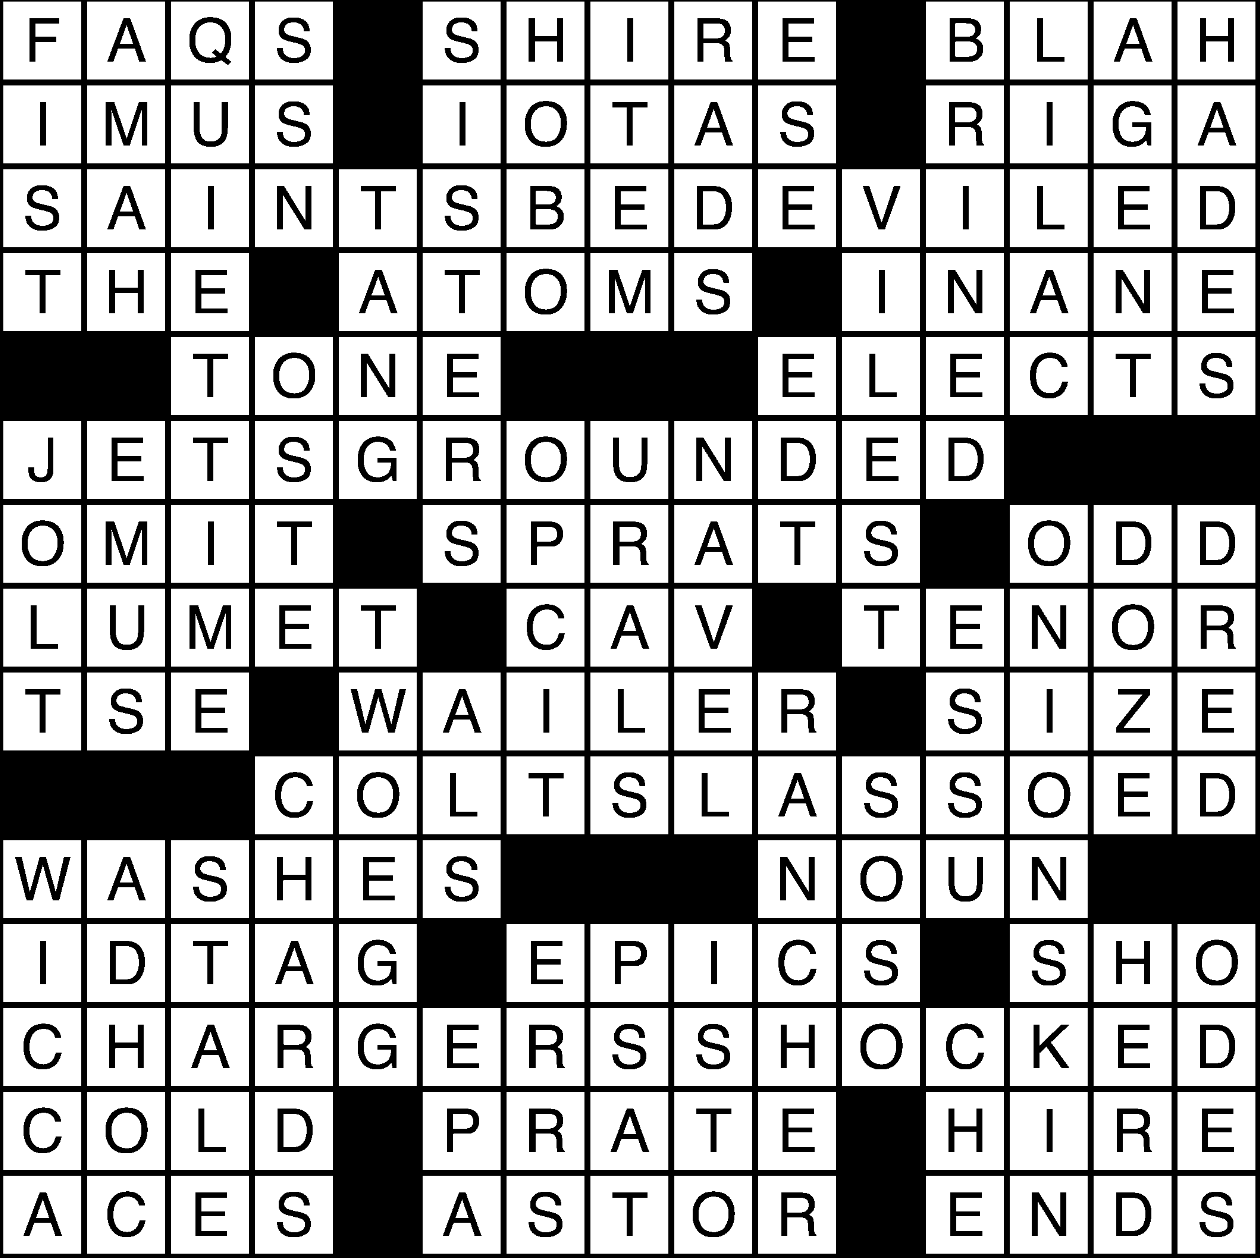 nytimes crosswords solution